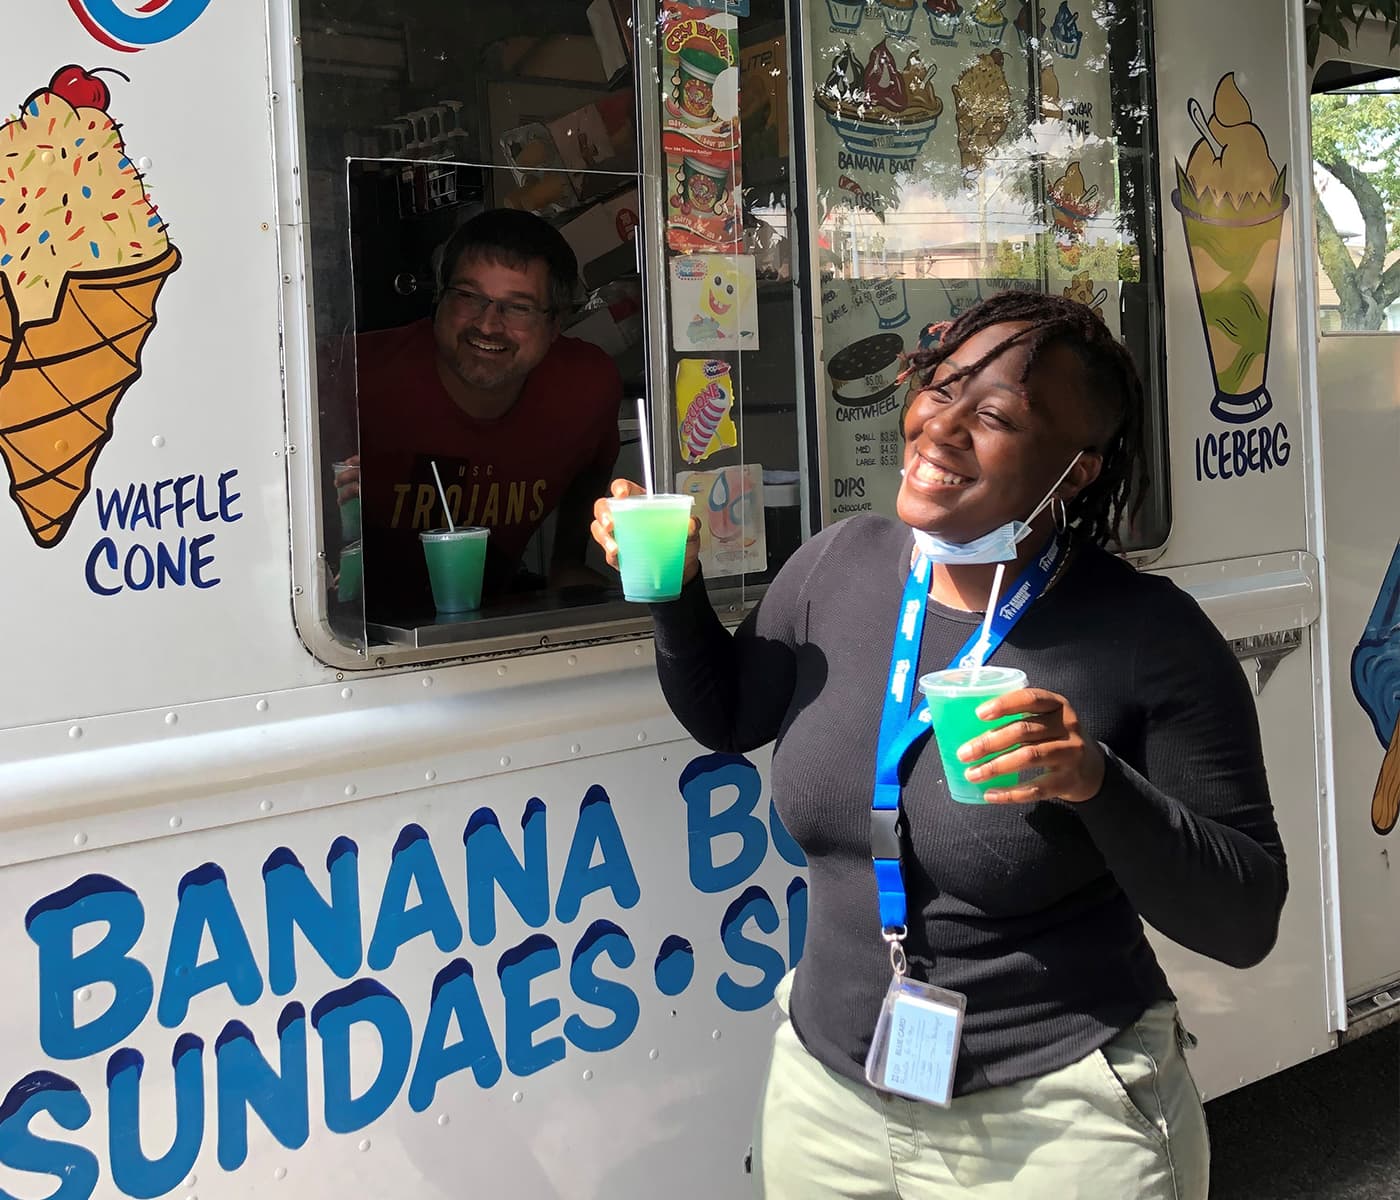 A woman holding two slushies smiling with the ice cream man